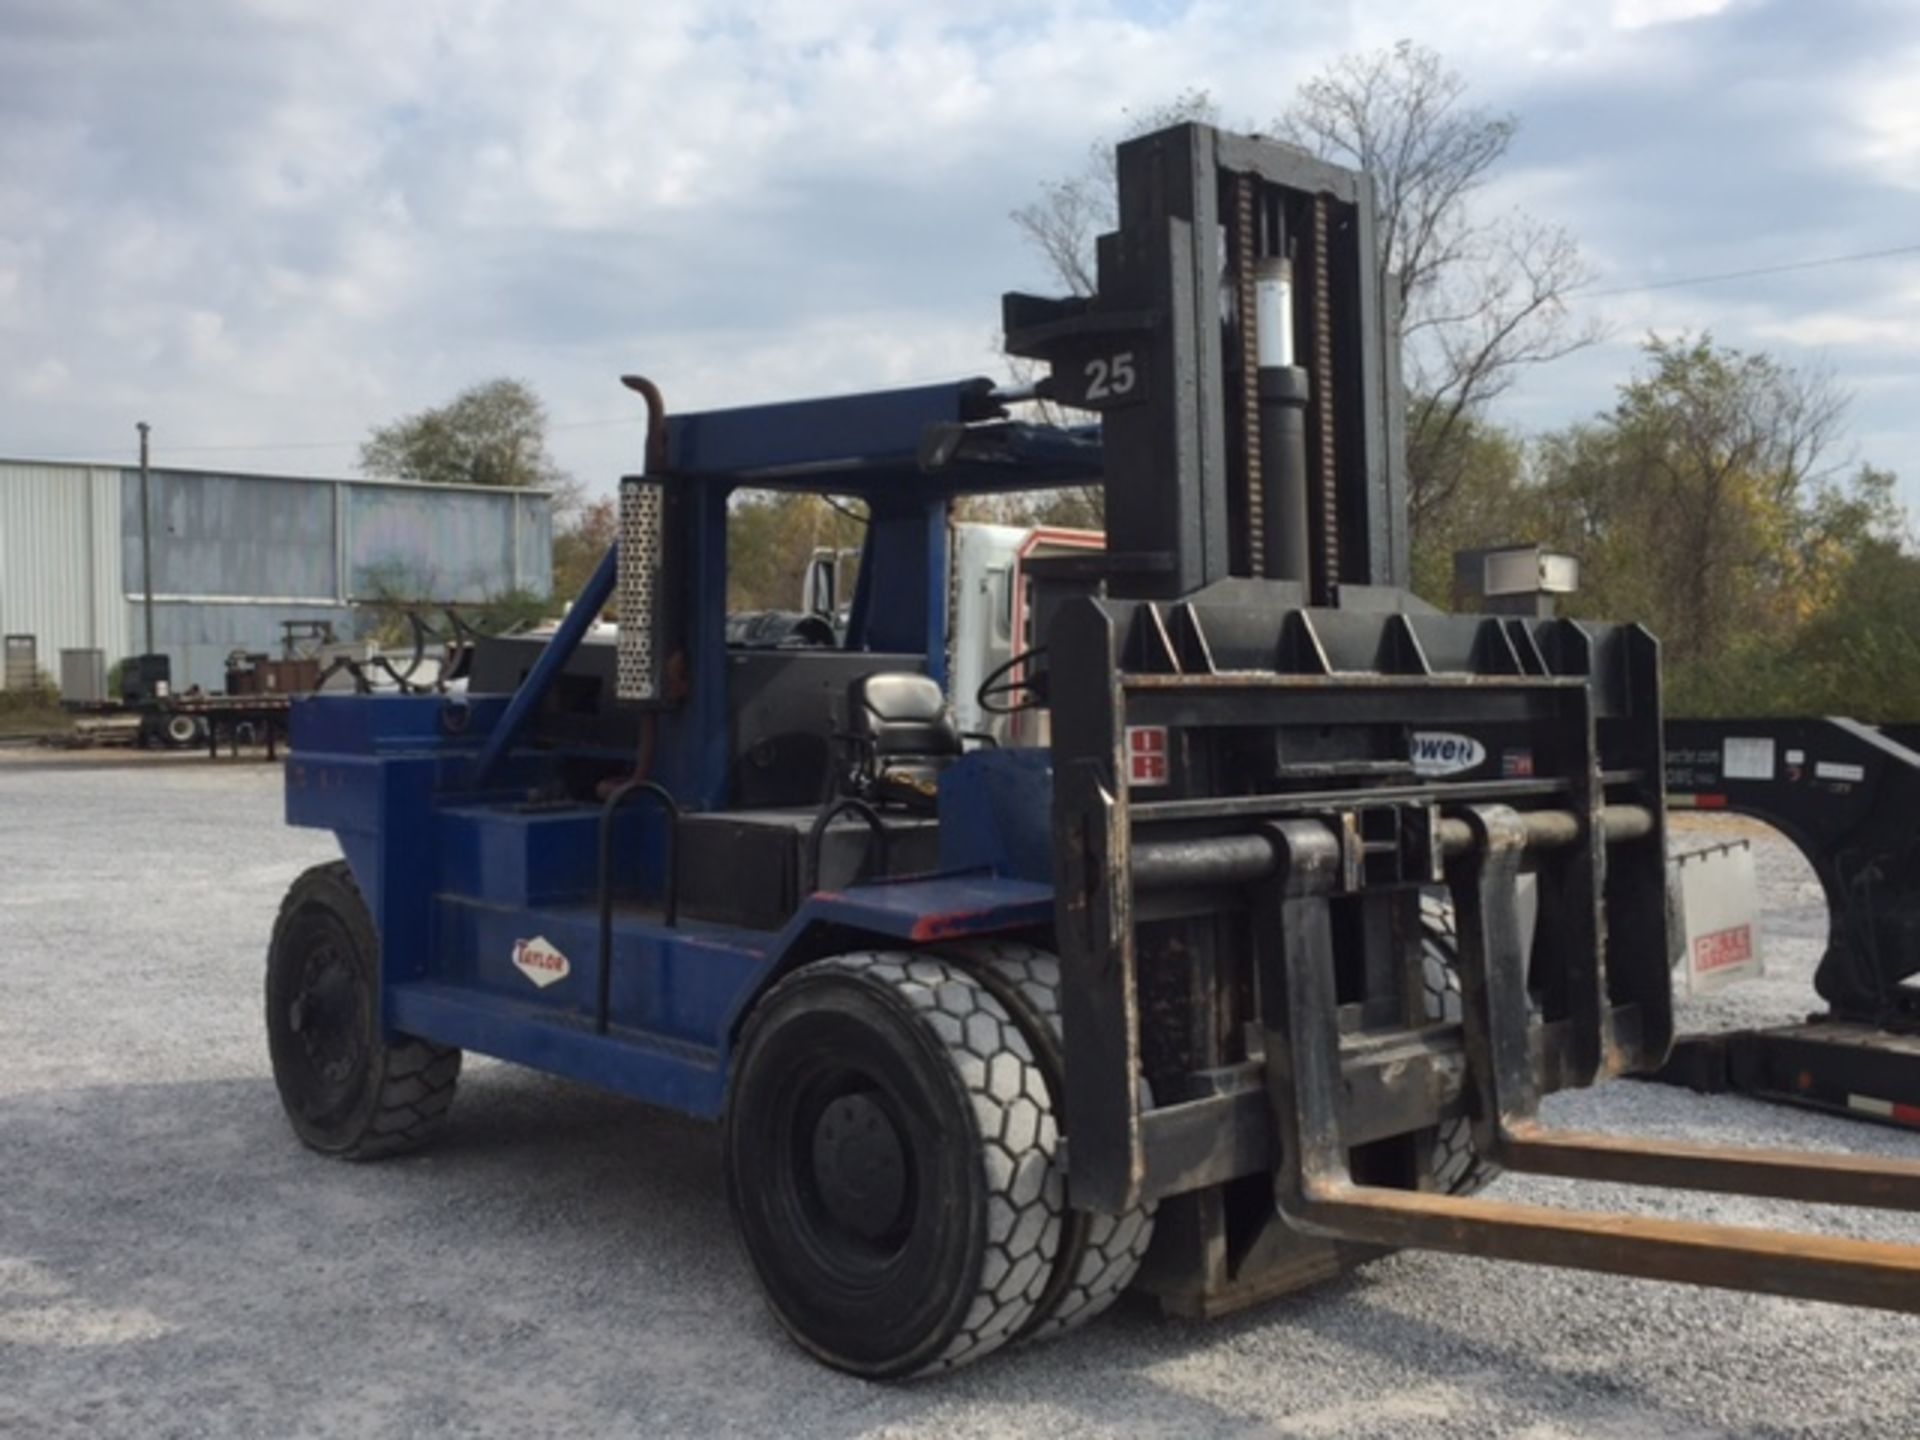 Taylor 40,000LB Forklift, LP Gas, 9' Lift, Cushion Tire, 351 Cleveland Ford Engine - Image 2 of 6